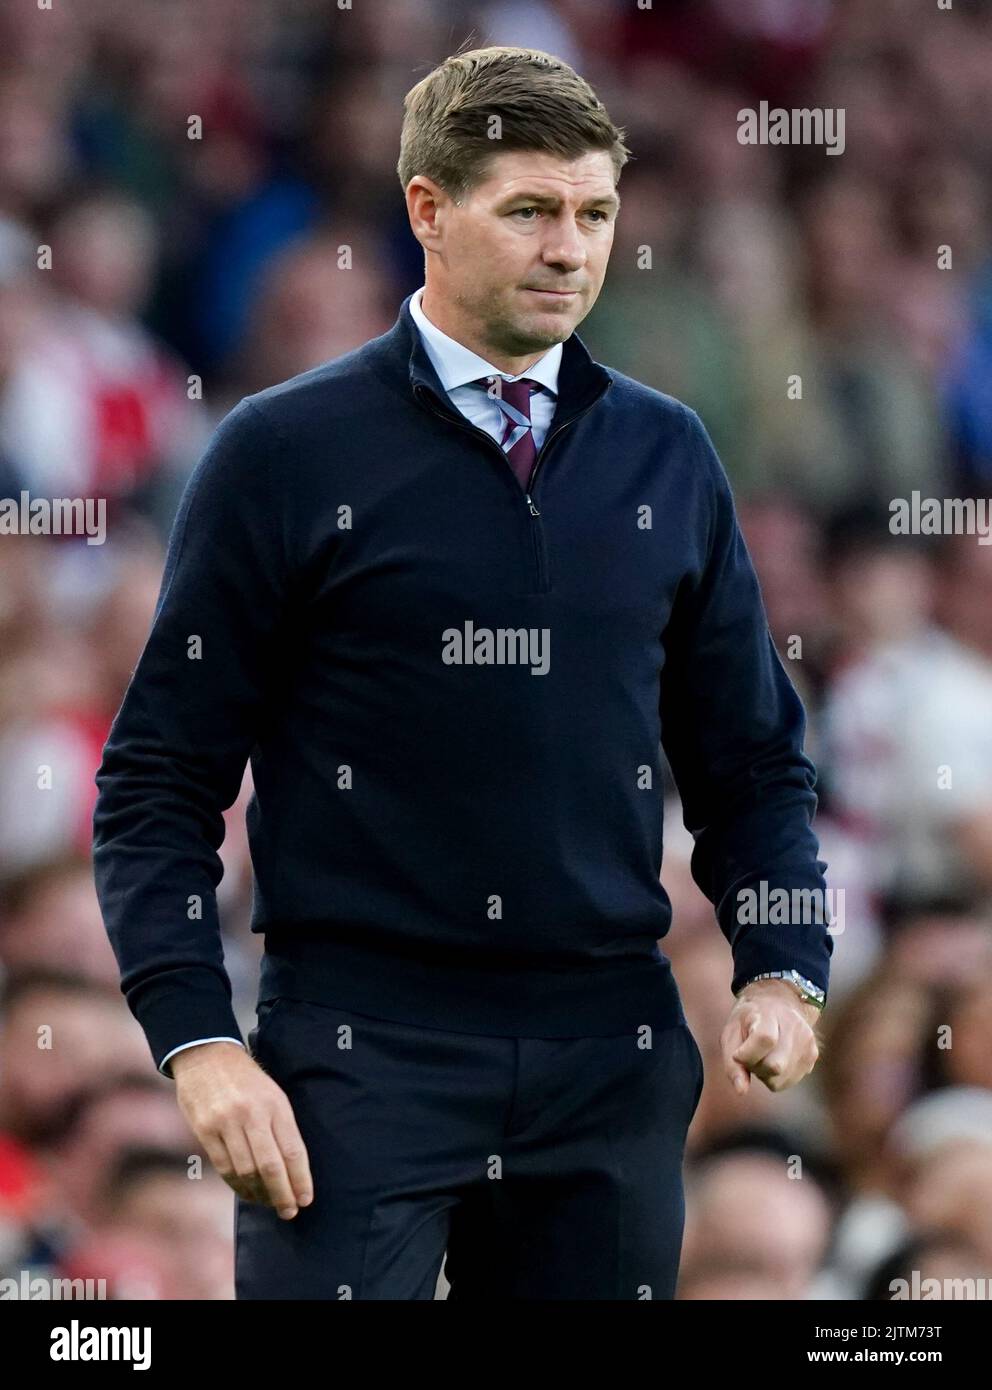 Aston Villa manager Steven Gerrard watches play during the Premier